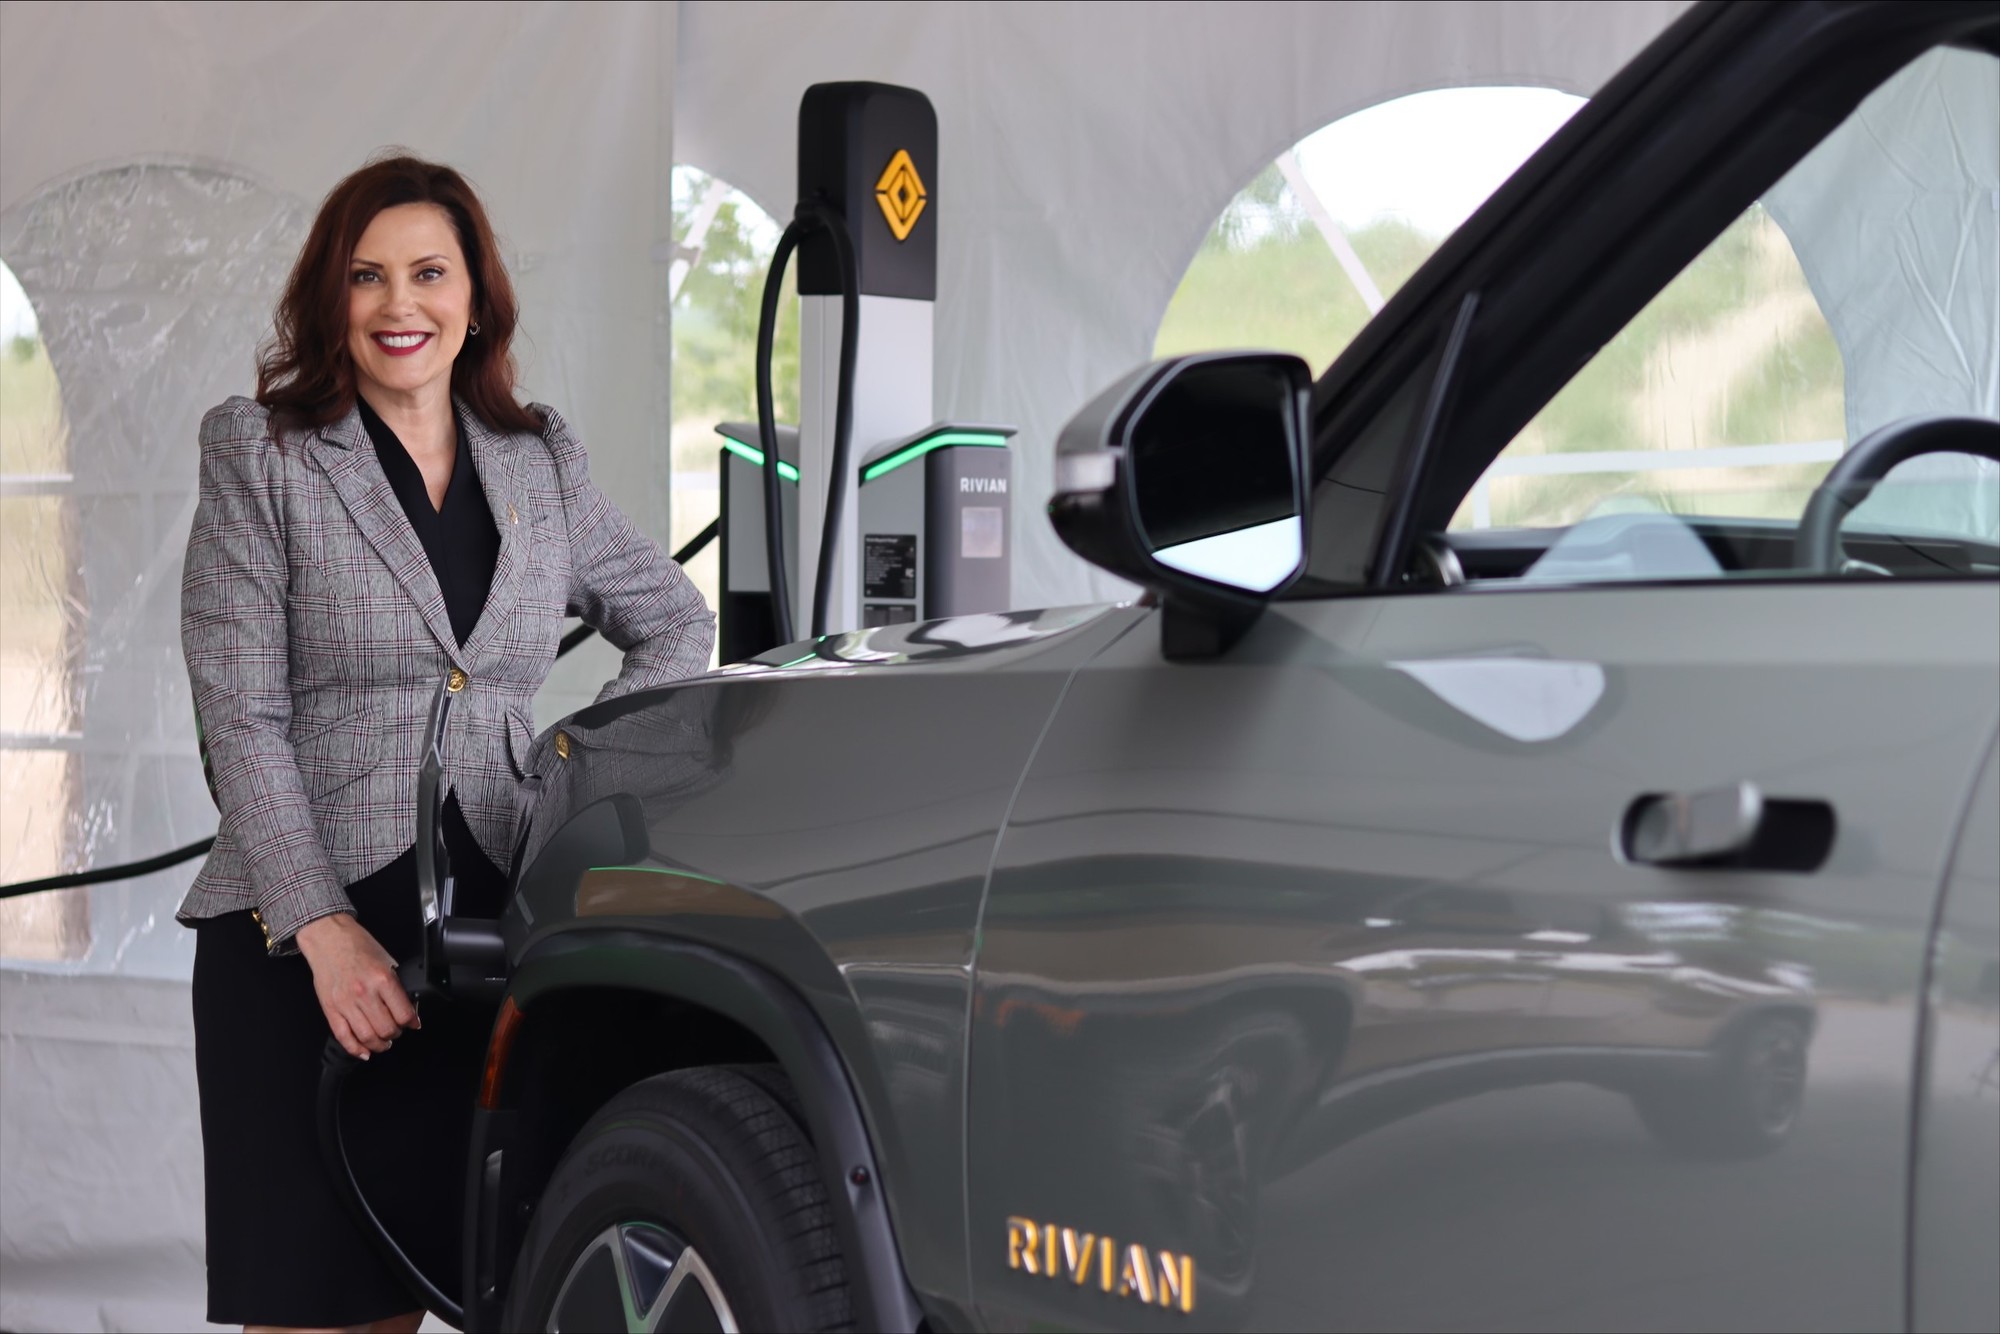 Governor Whitmer at EV charger press conference 